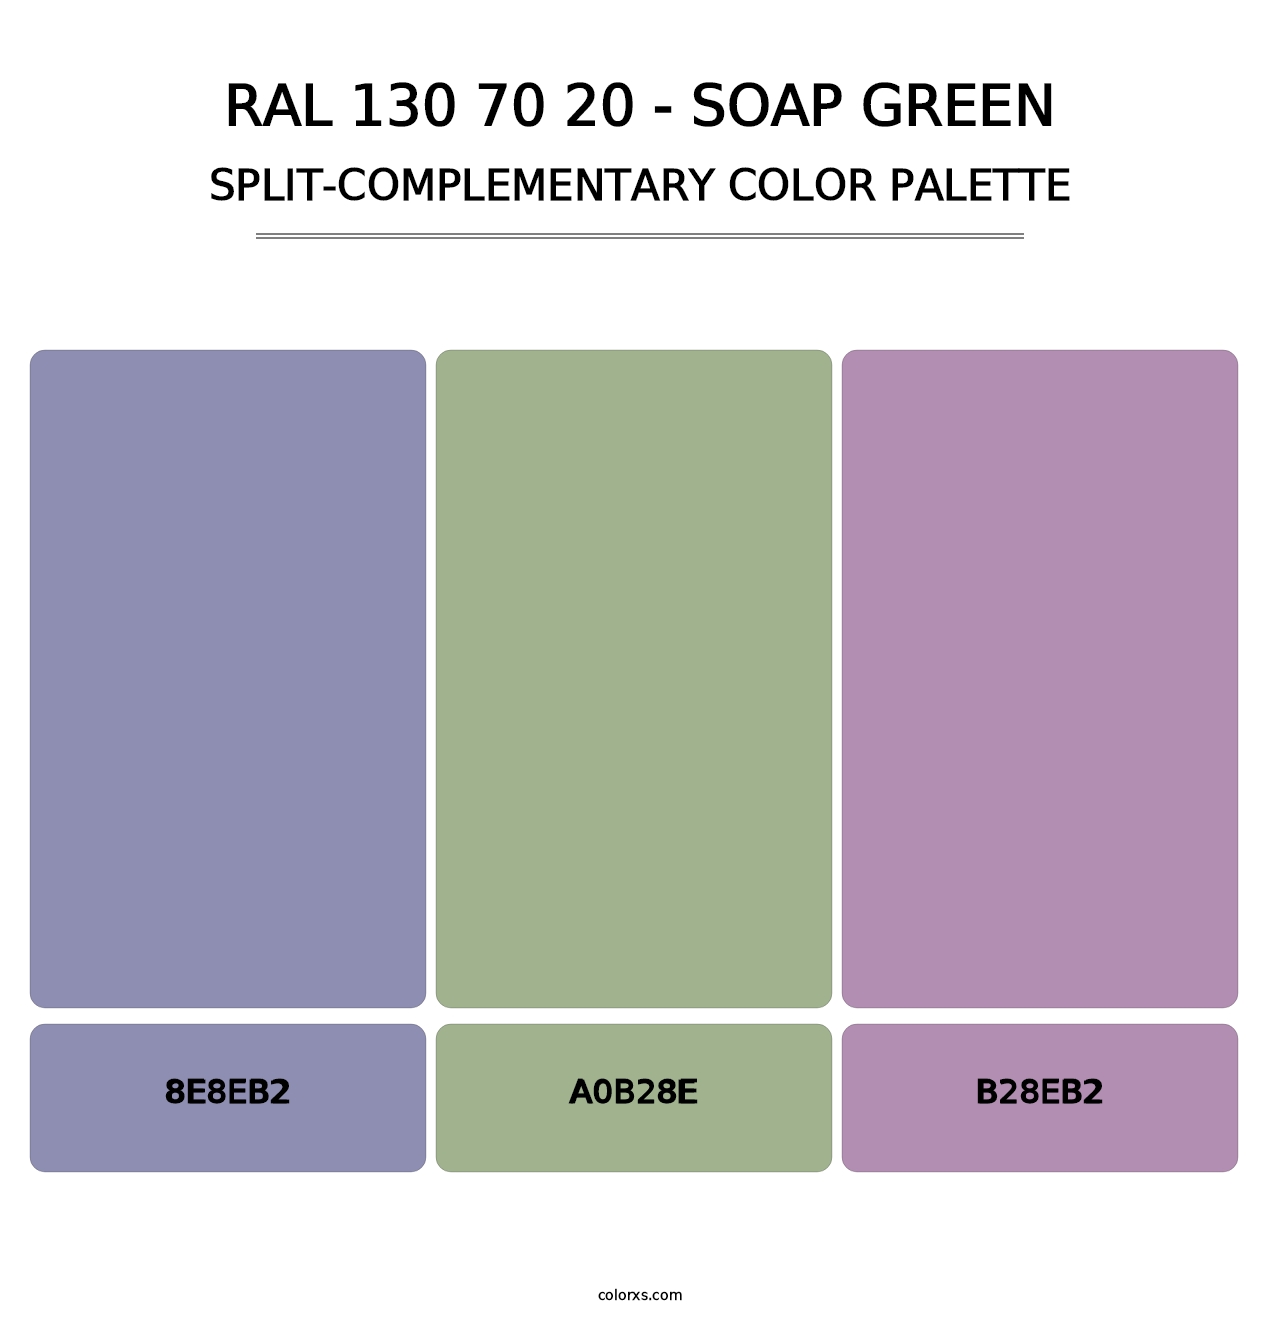 RAL 130 70 20 - Soap Green - Split-Complementary Color Palette